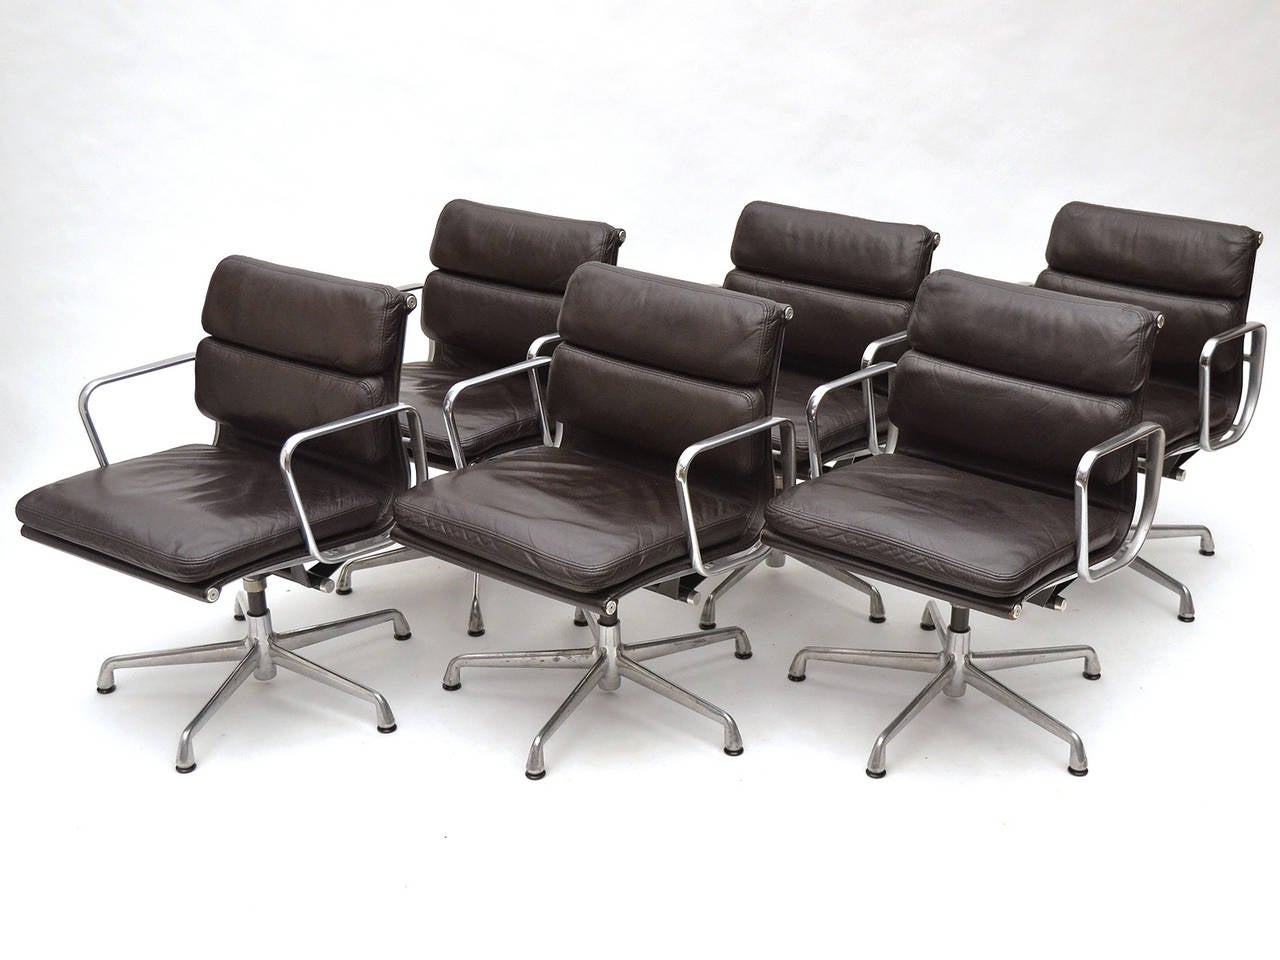 This beautiful set of Eames soft pad chairs is in excellent original condition. They have rich brown/ black leather upholstery the color of black coffee, swivel, and tilt function. The arms, which commonly show wear and losses to the protective